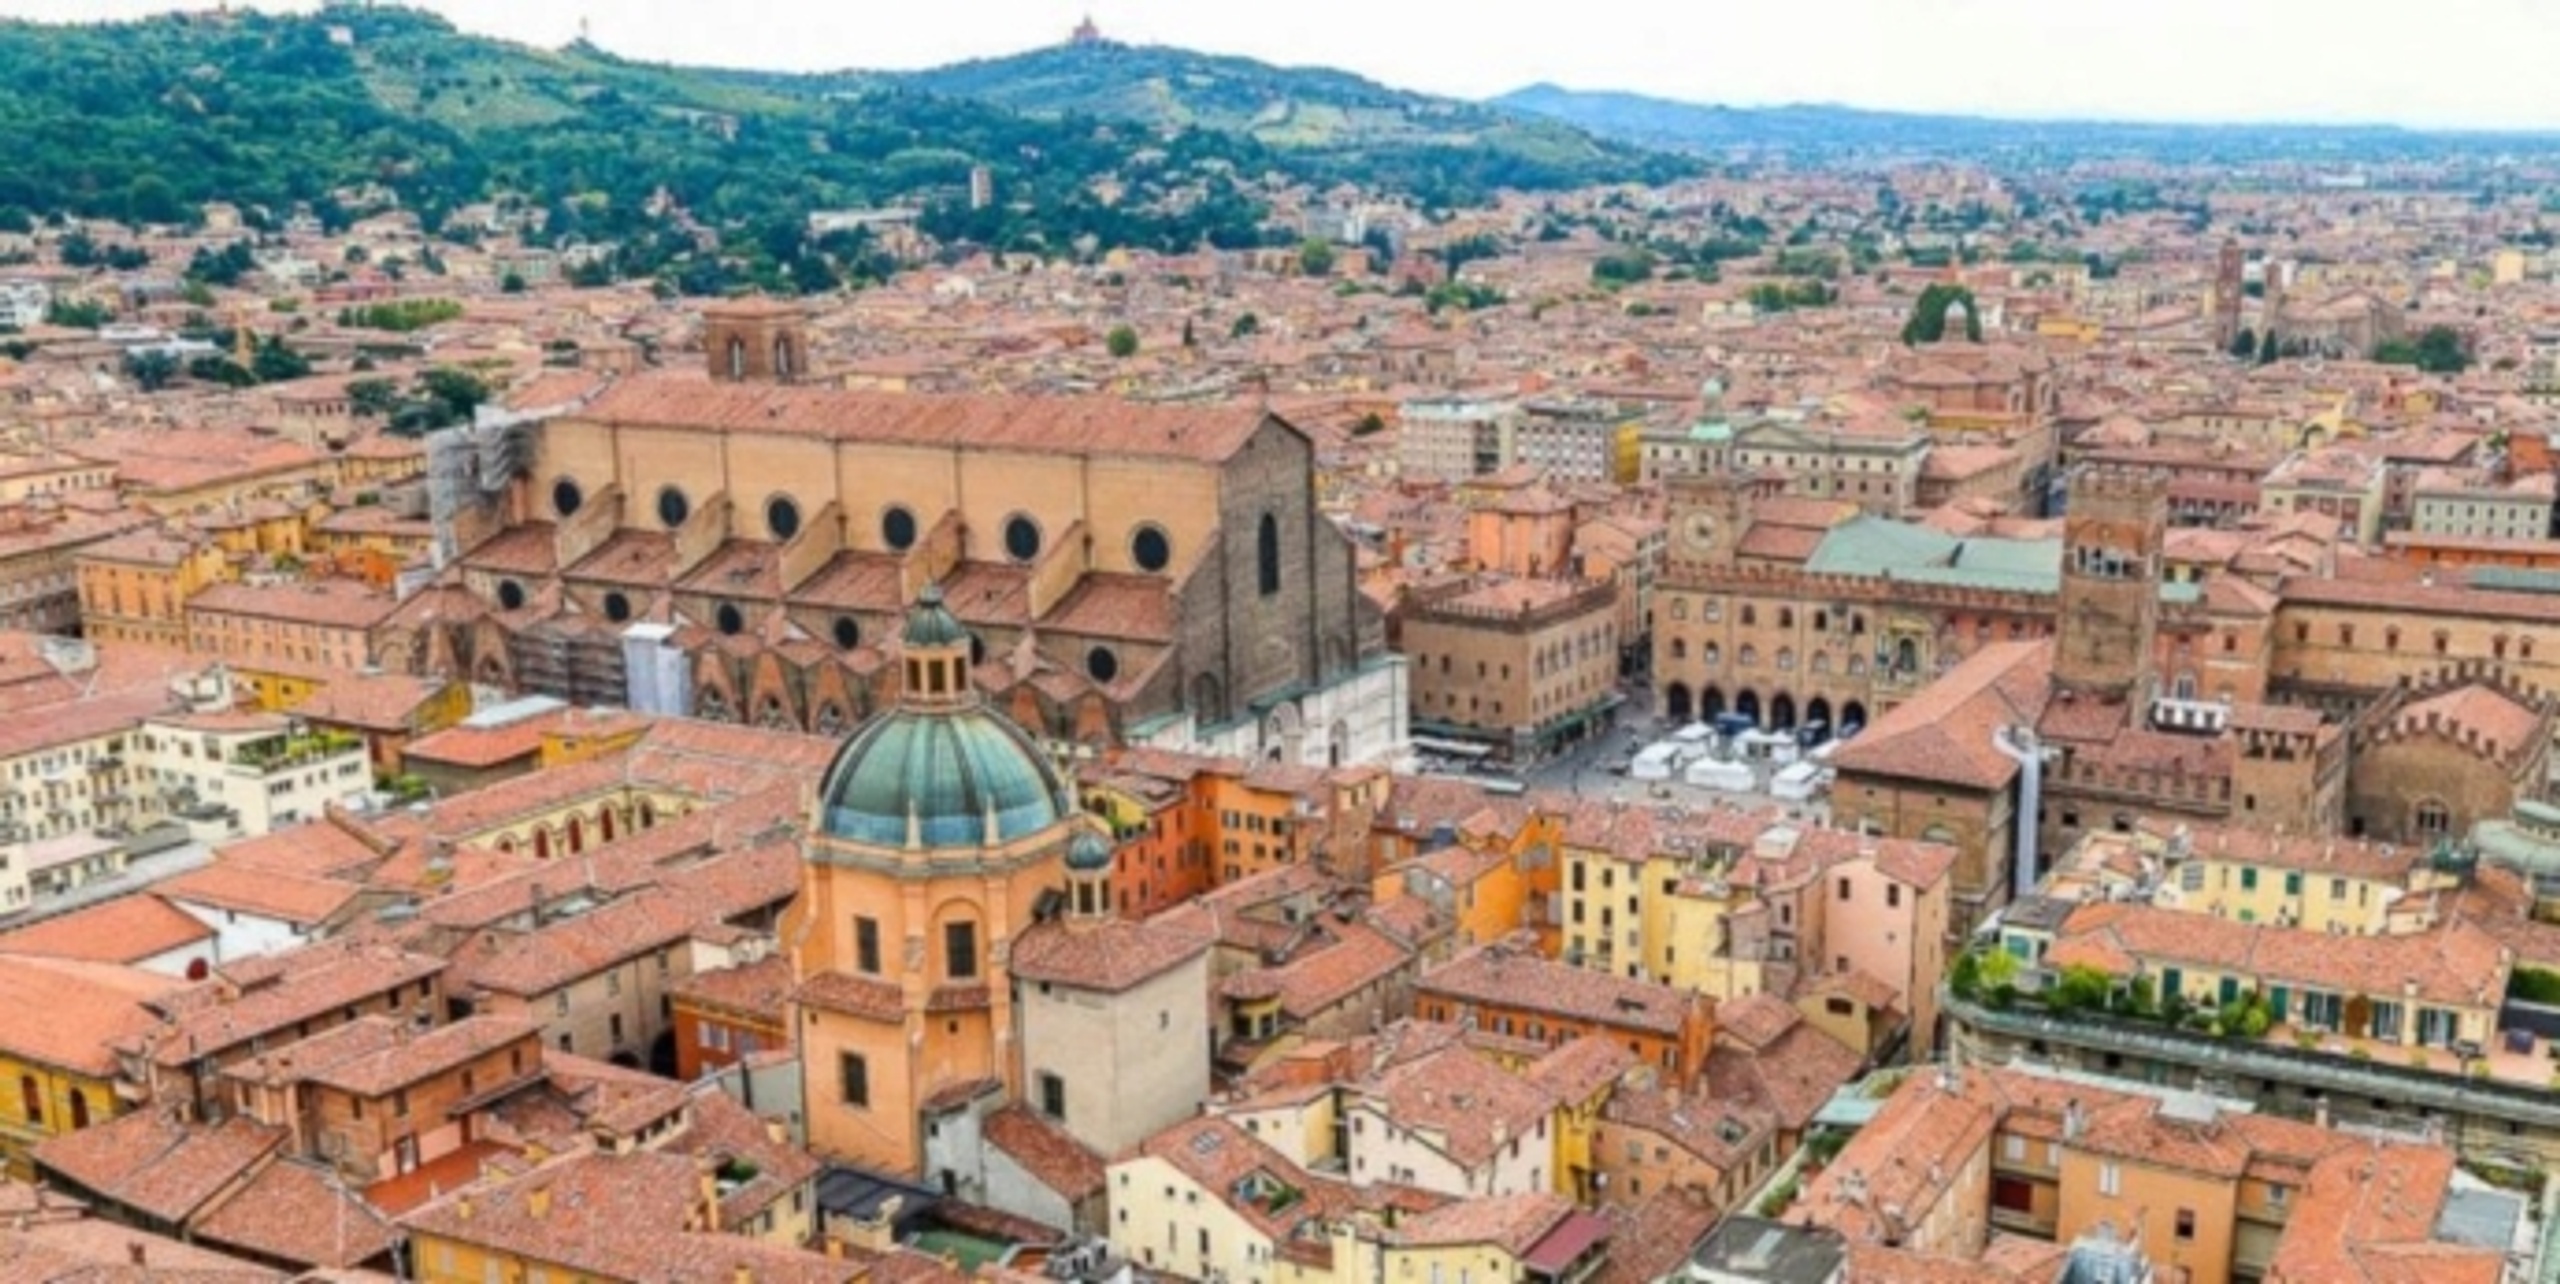 My past life as a sports agent: Bologna, Italy